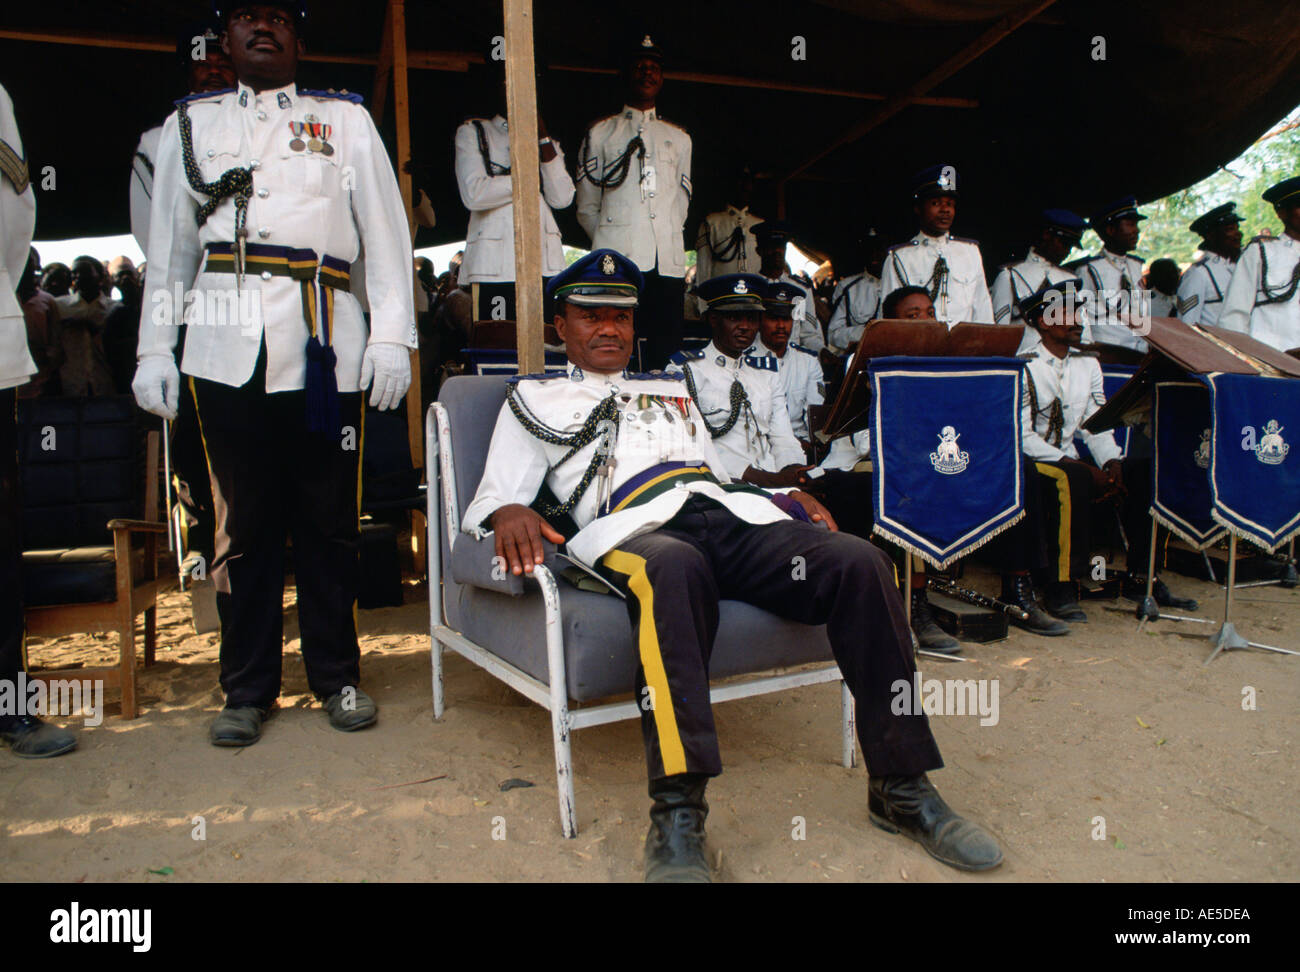 Soldiers waiting for military parade to start in Nigeria Stock Photo